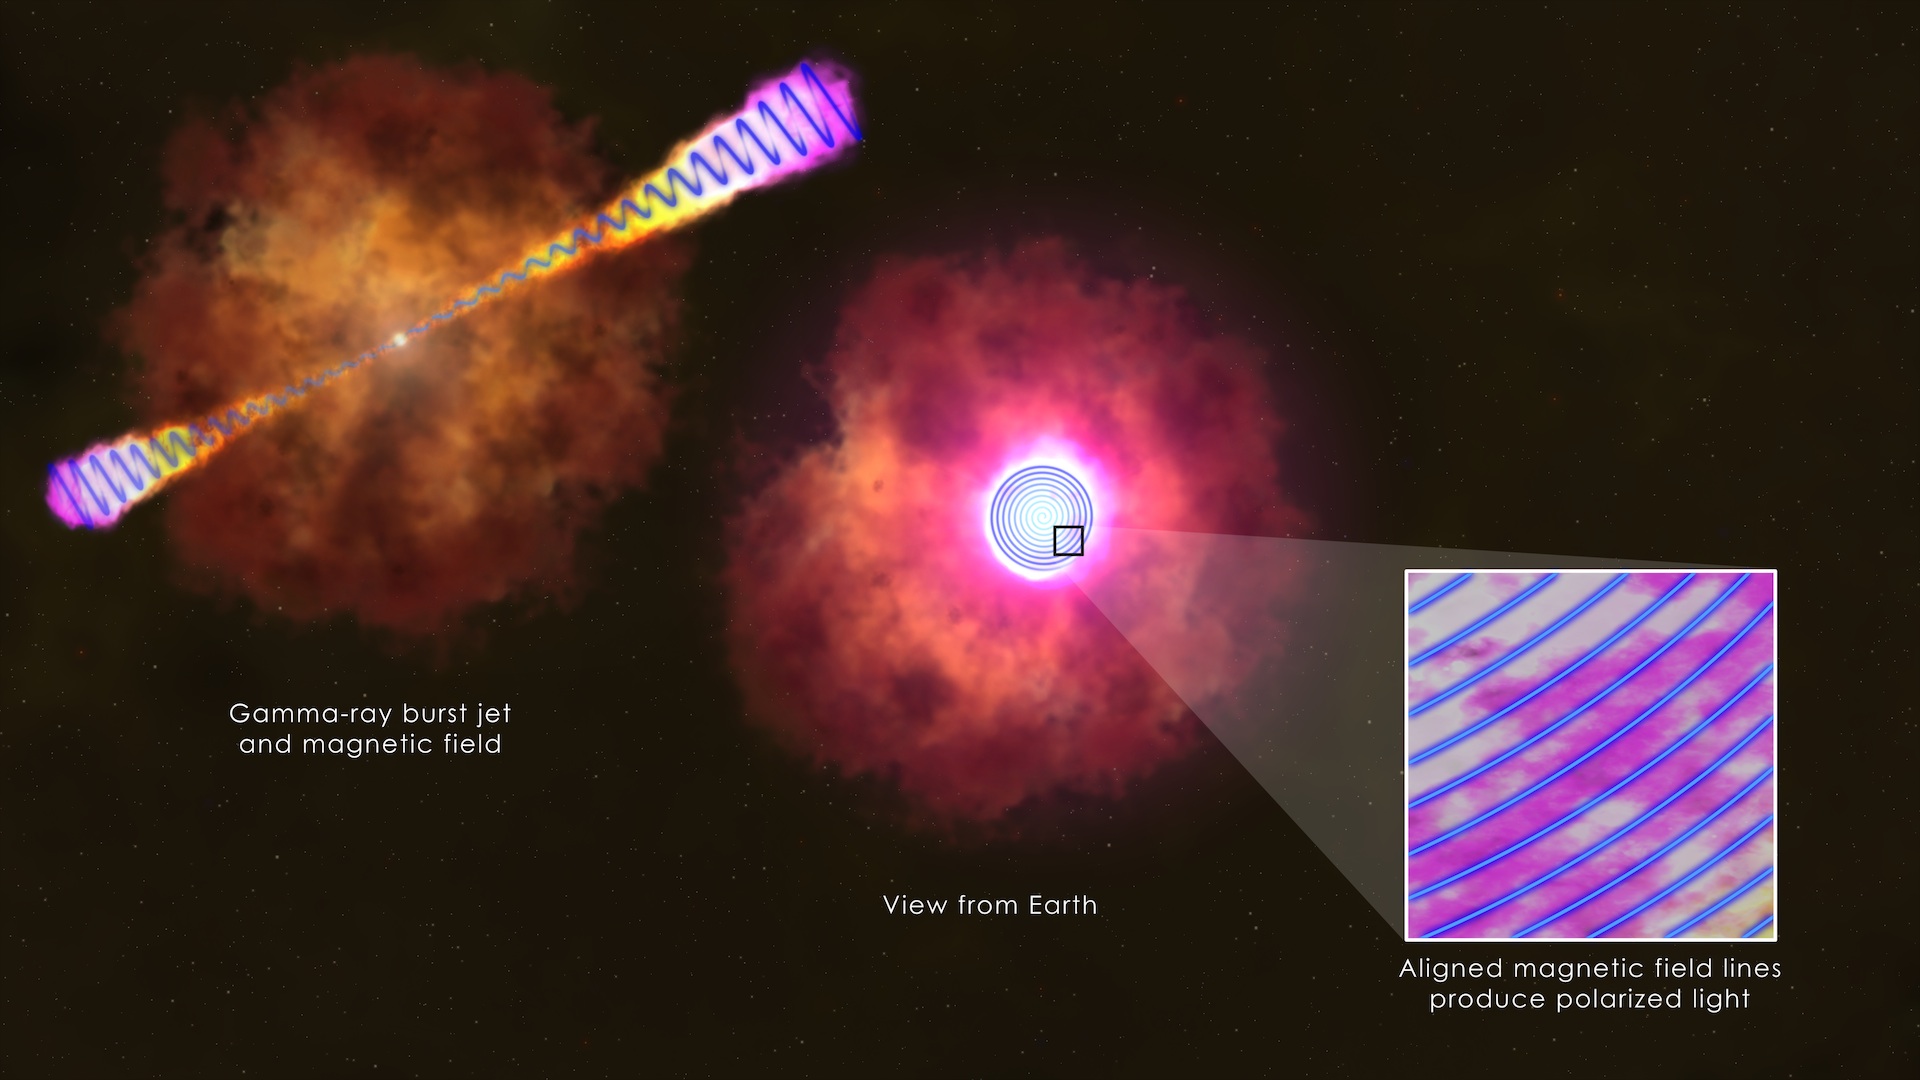 Measurements of polarized light in the afterglow of GRB 120308A by the Liverpool Telescope and its RINGO2 instrument indicate the presence of a large-scale stable magnetic field linked with a young black hole, as shown in this illustration.Credit: NASA's Goddard Space Flight Center/S. Wiessinger